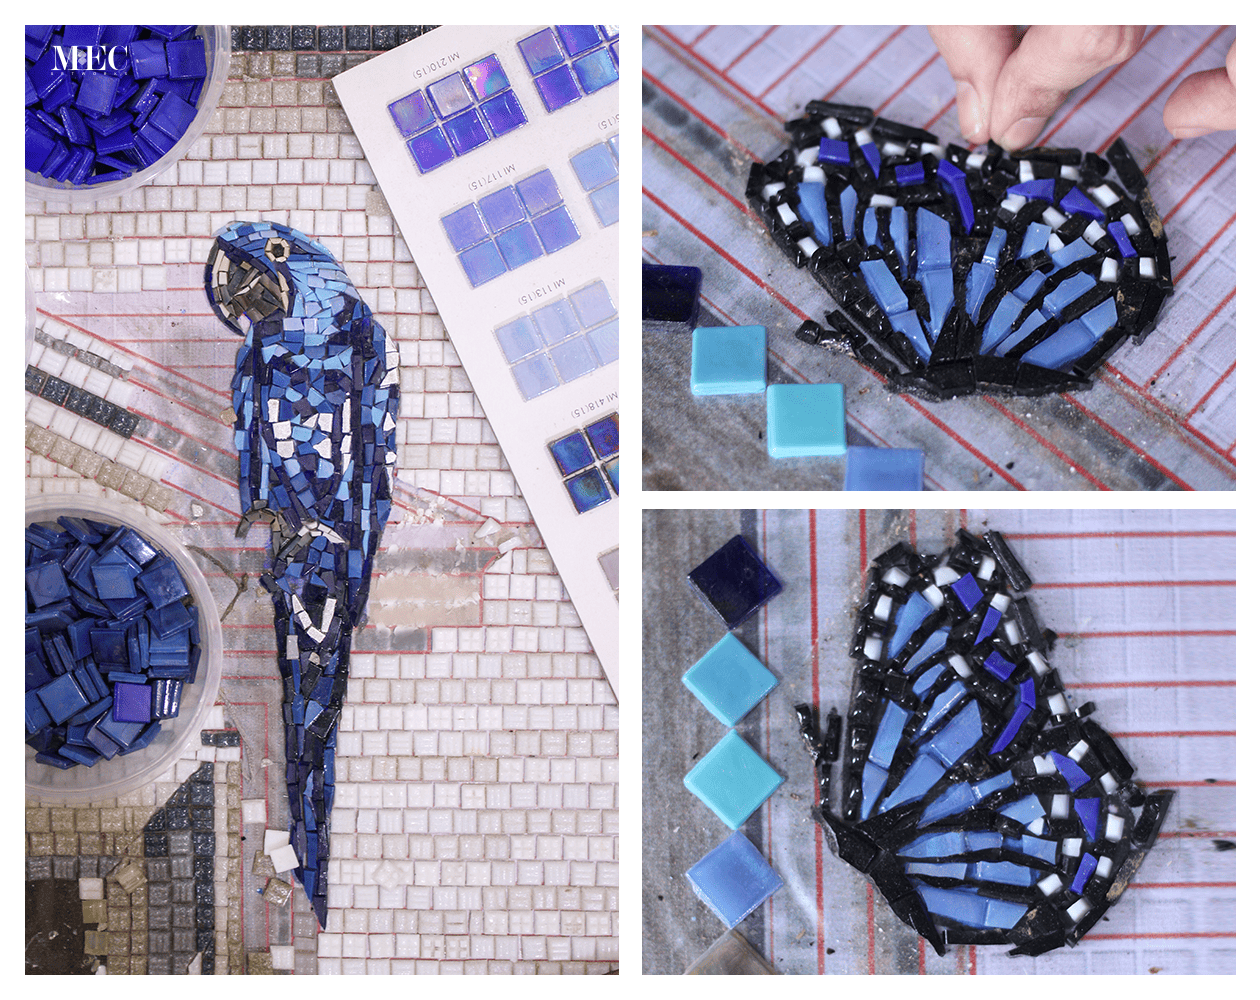 Mosaic art of a macaw in various shades of blue tiles
